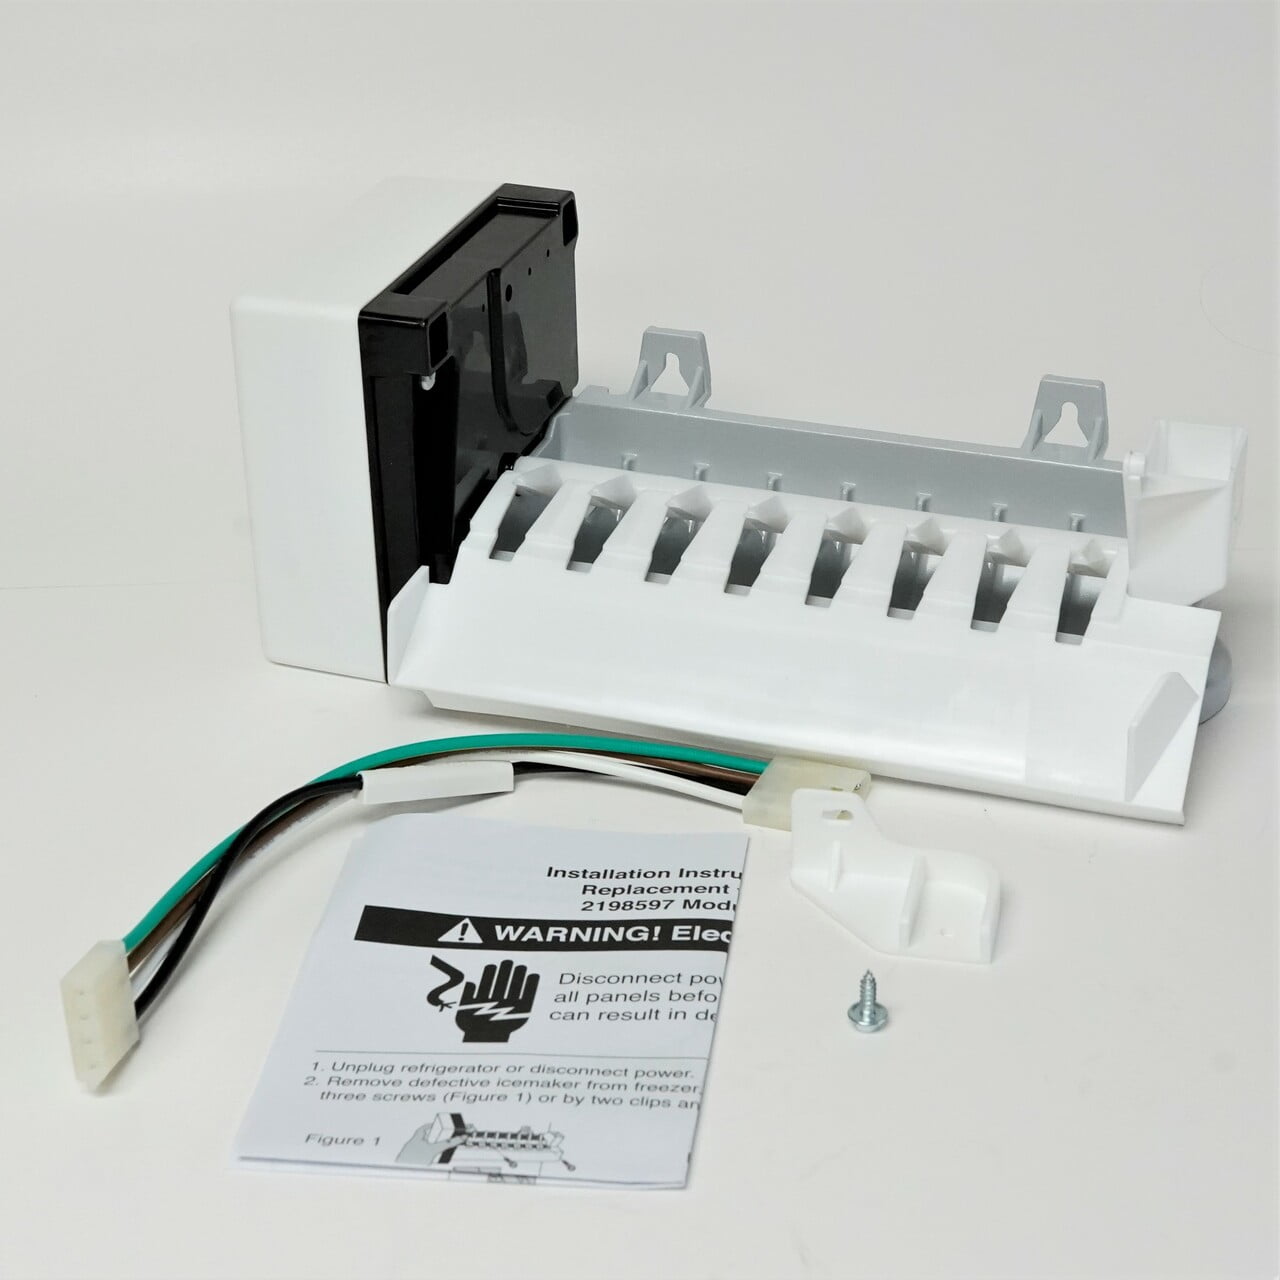 ERP ERGEIM Replacement Icemaker Ice Maker Kit replaces GE IM-1 IM-3 NEW 